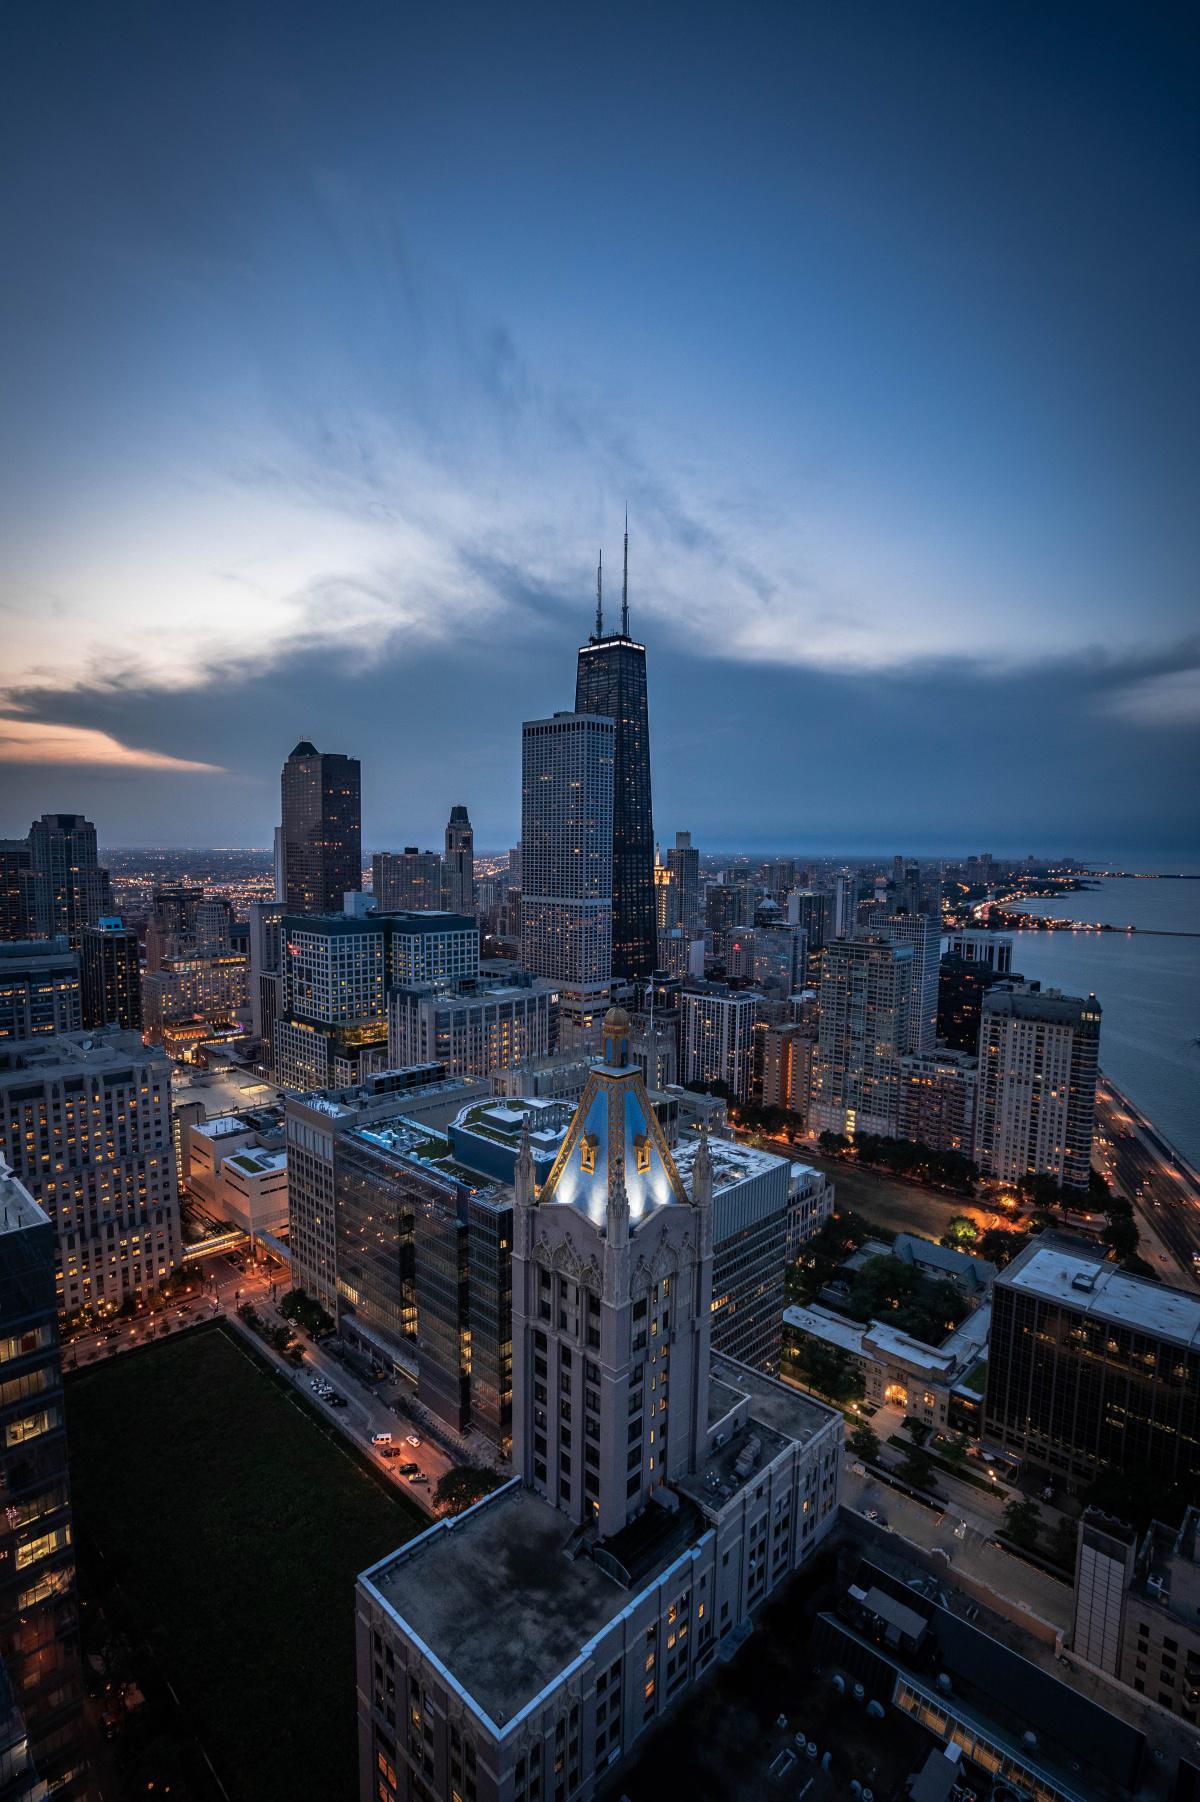 SOL Magazine - Chicago's Symphony: Where Music, Cuisine, and Weather Create a Distinctive Urban Experience